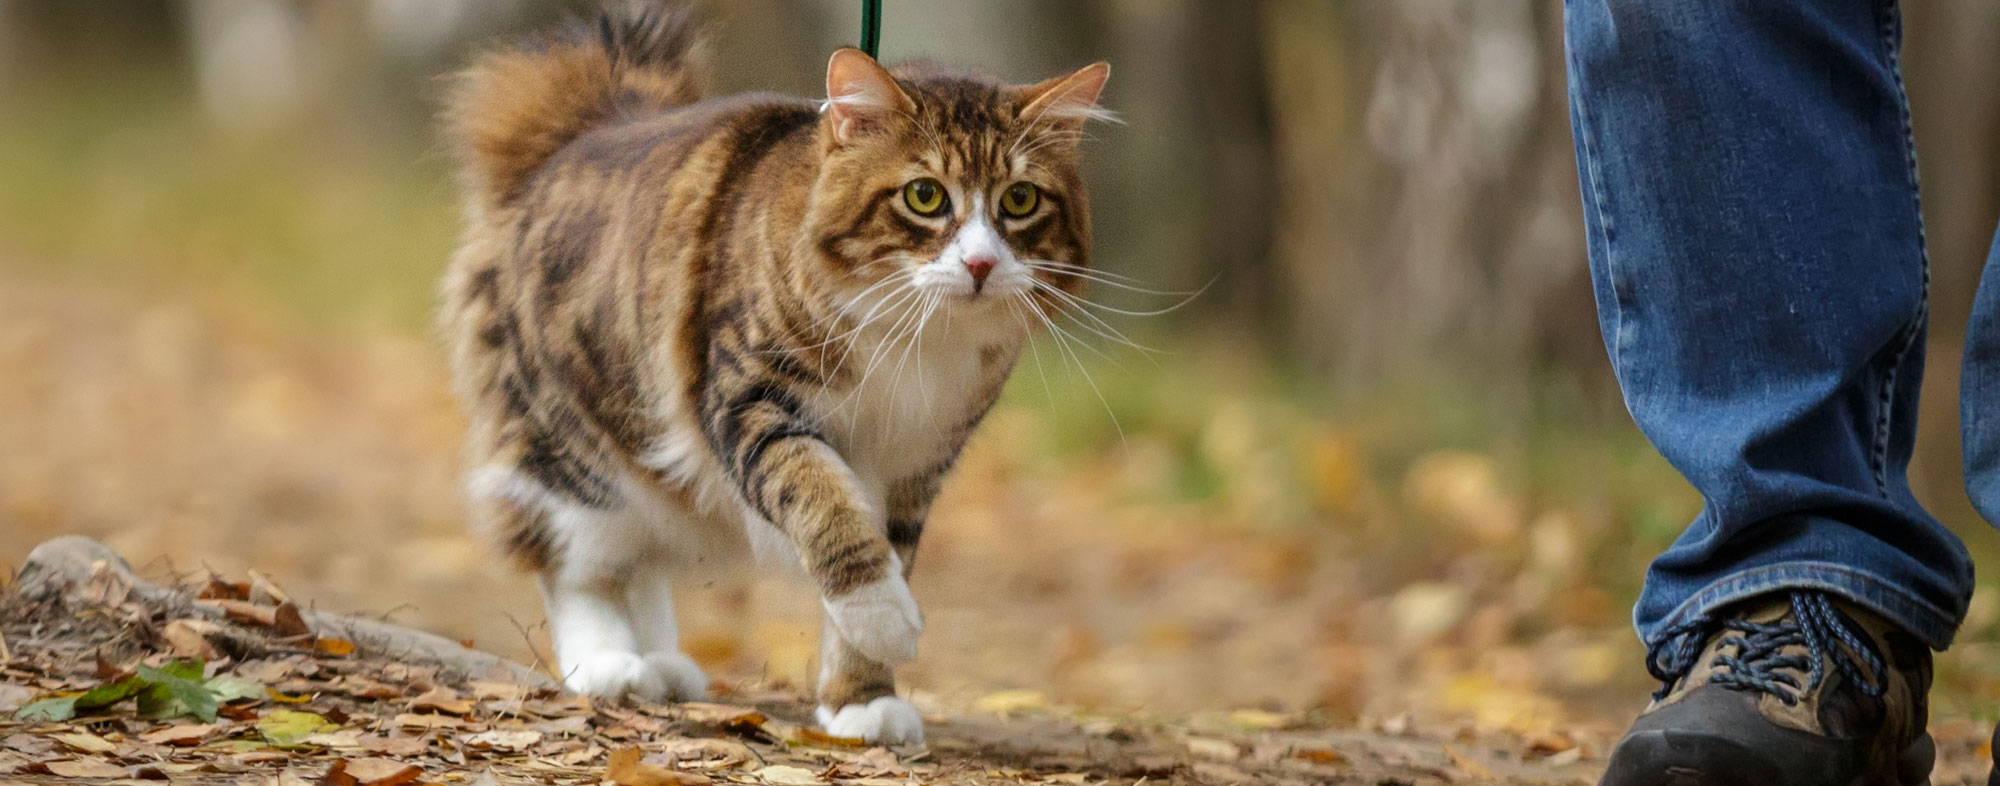 Your cat will eventually enjoy walking on a leash outside with you